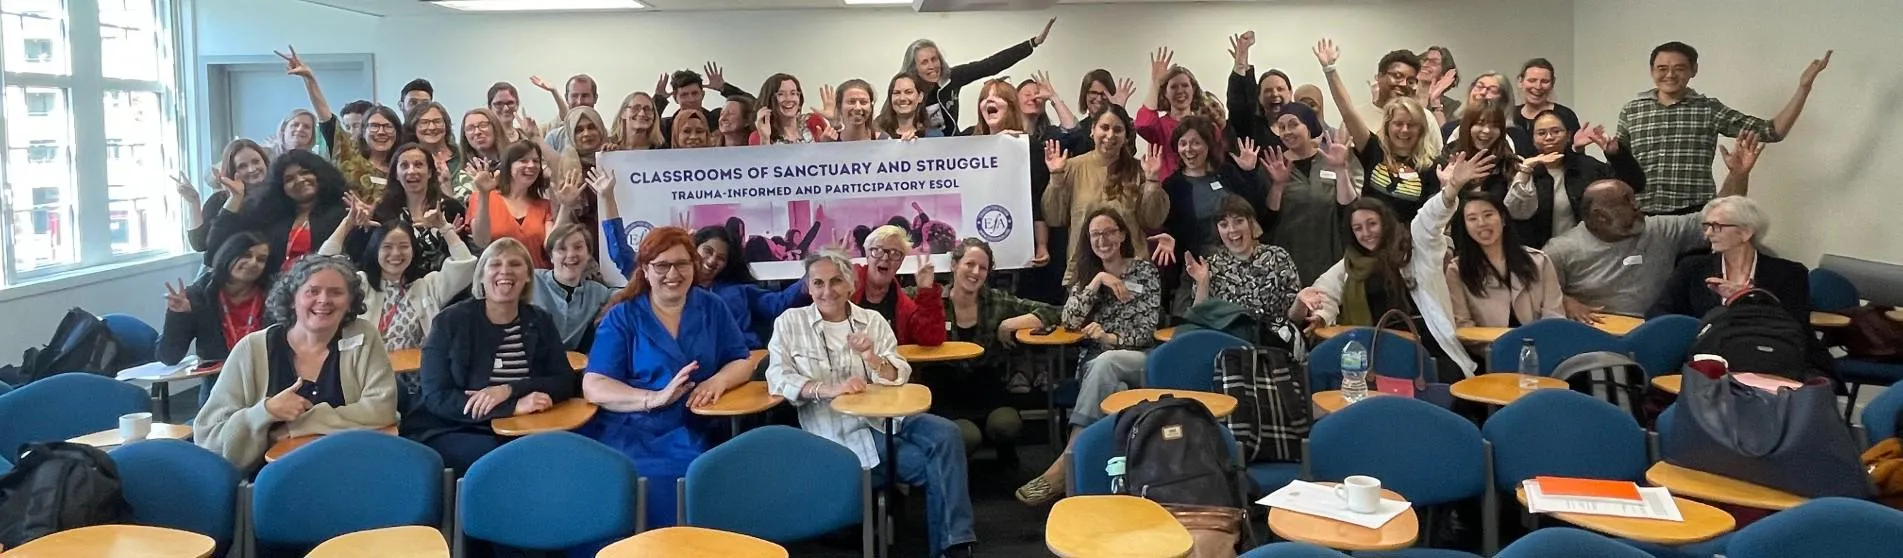 Teachers and students posing at the end of a class of English for speakers of other language, with a banner 'Classrooms of sanctuary and struggle'.